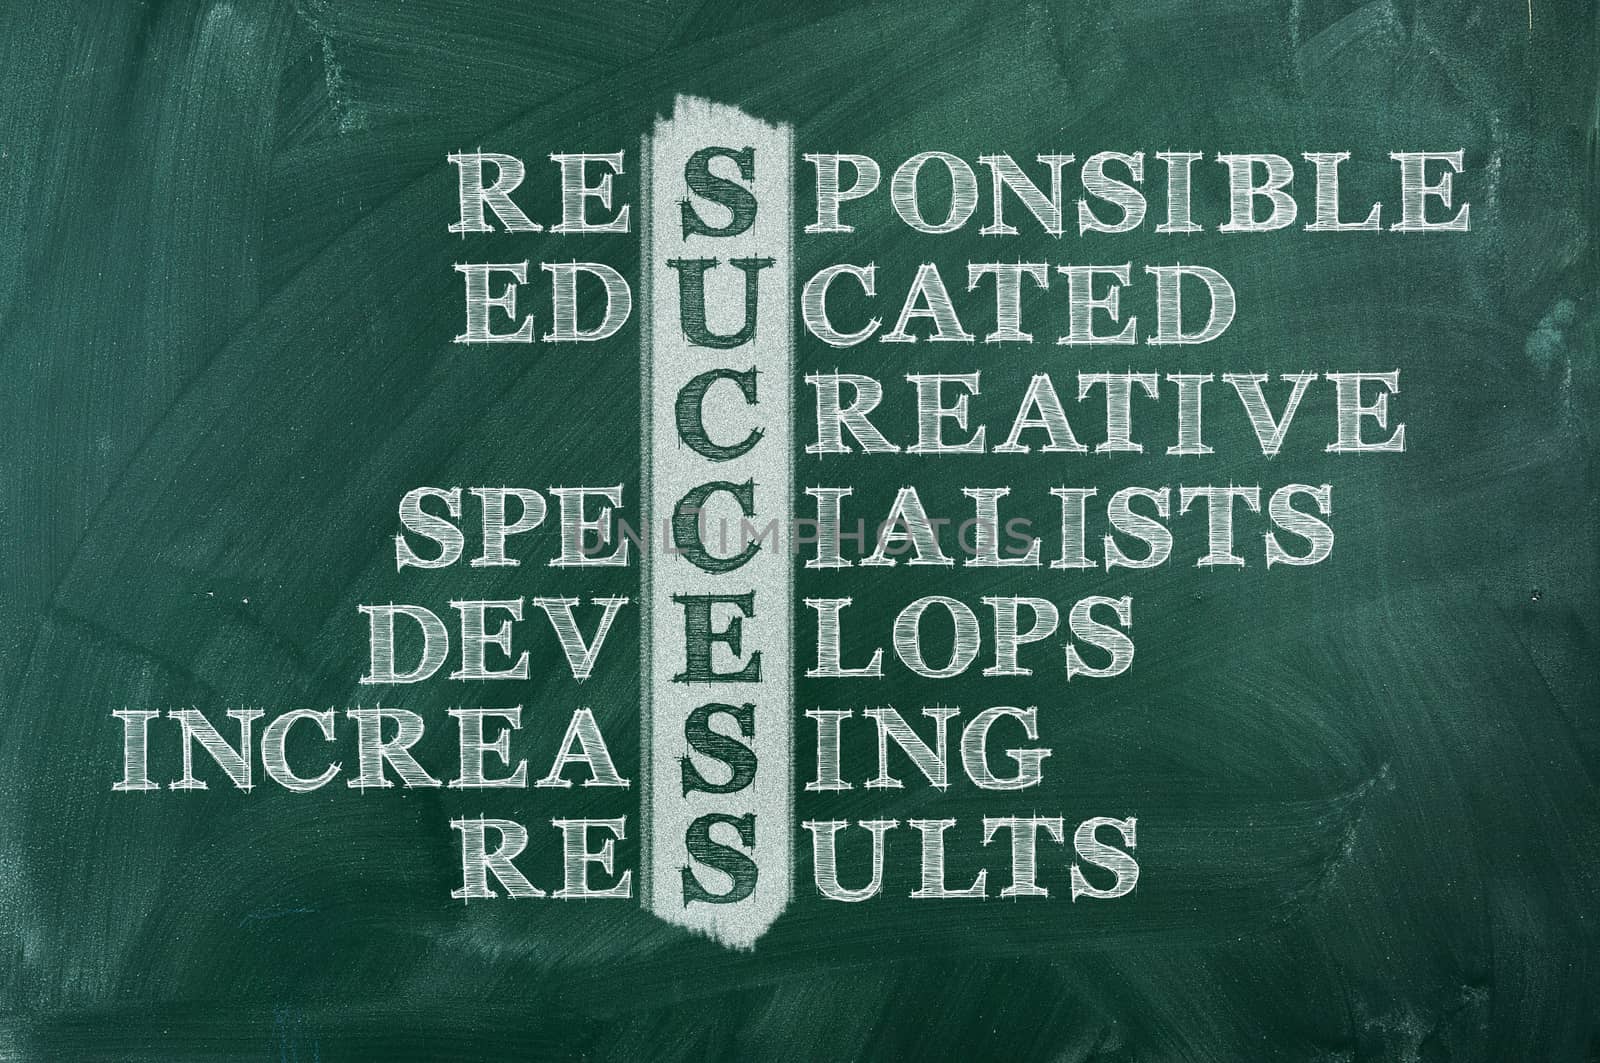 Success and other related words  in crossword on green blackboard.Business concept.